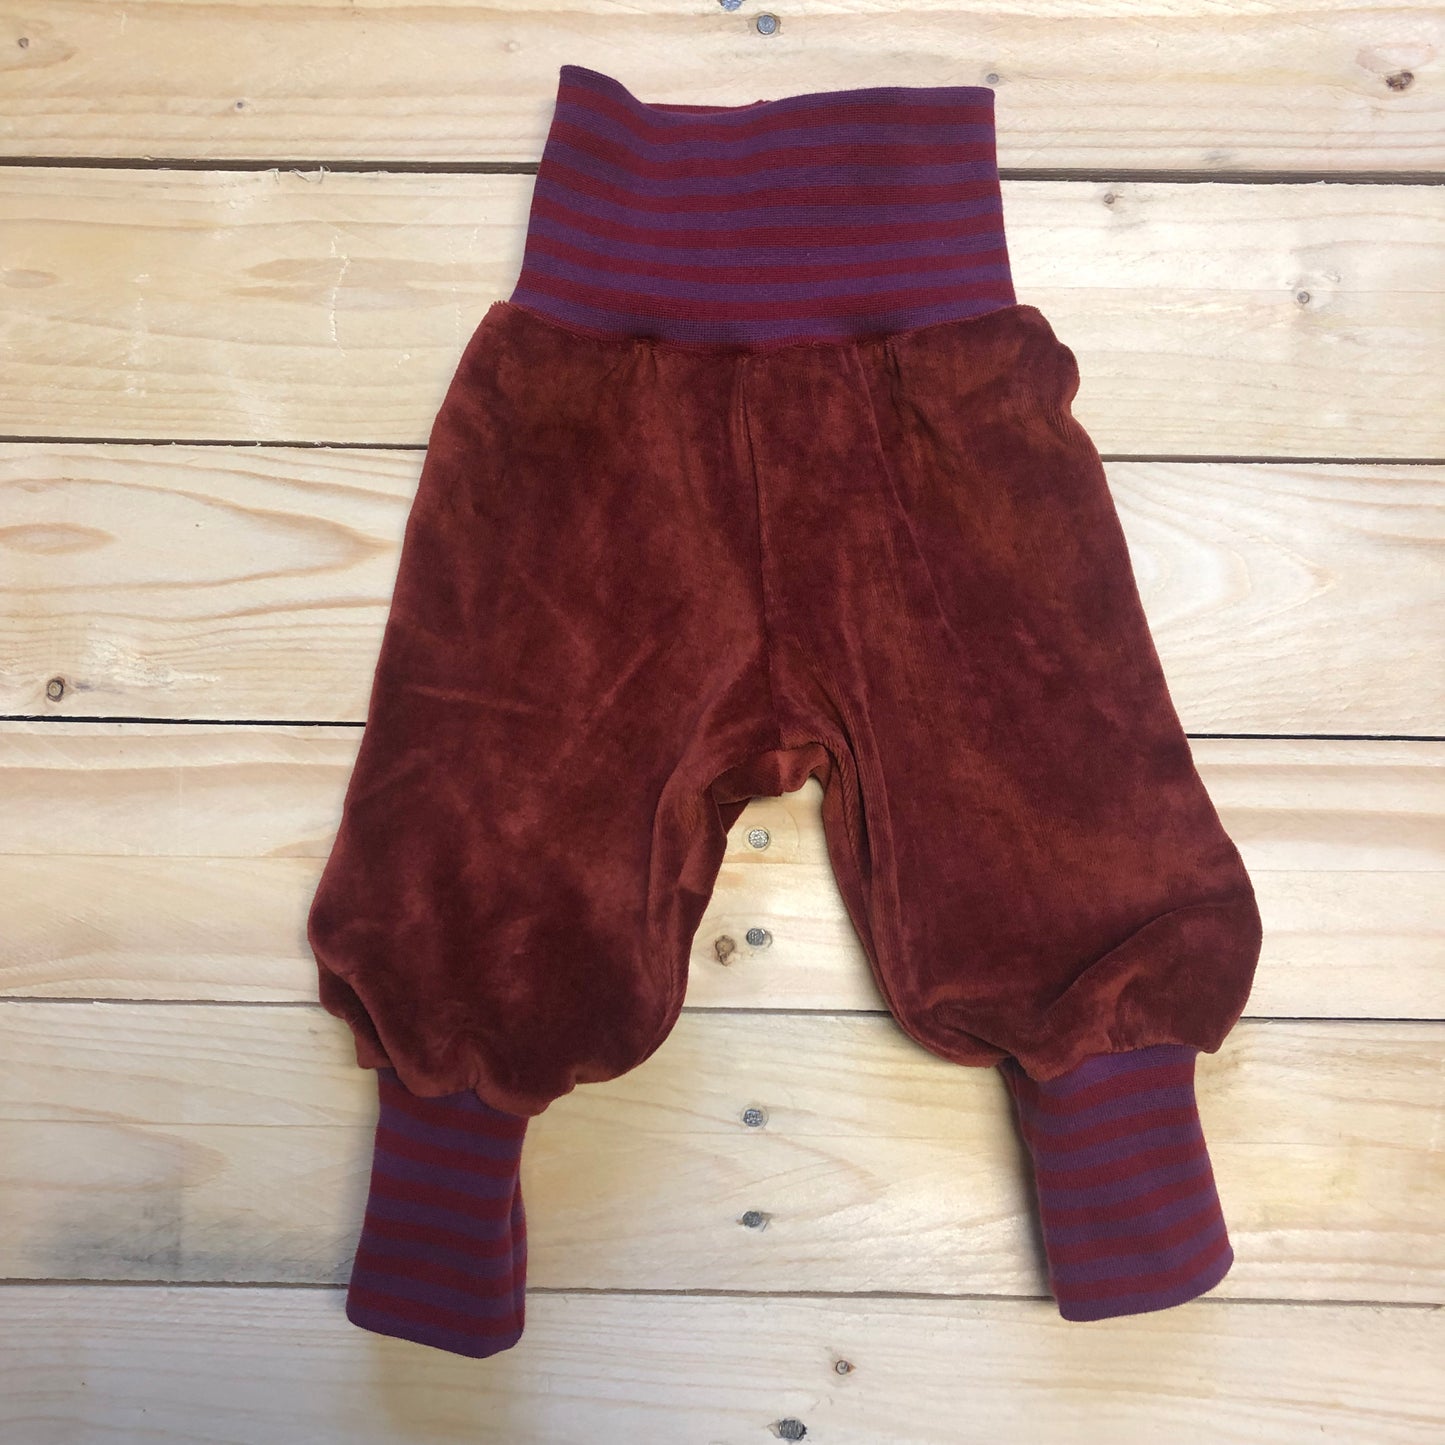 Baby Nickihose in rost / rot-lilagestreift 56/62, 68/74